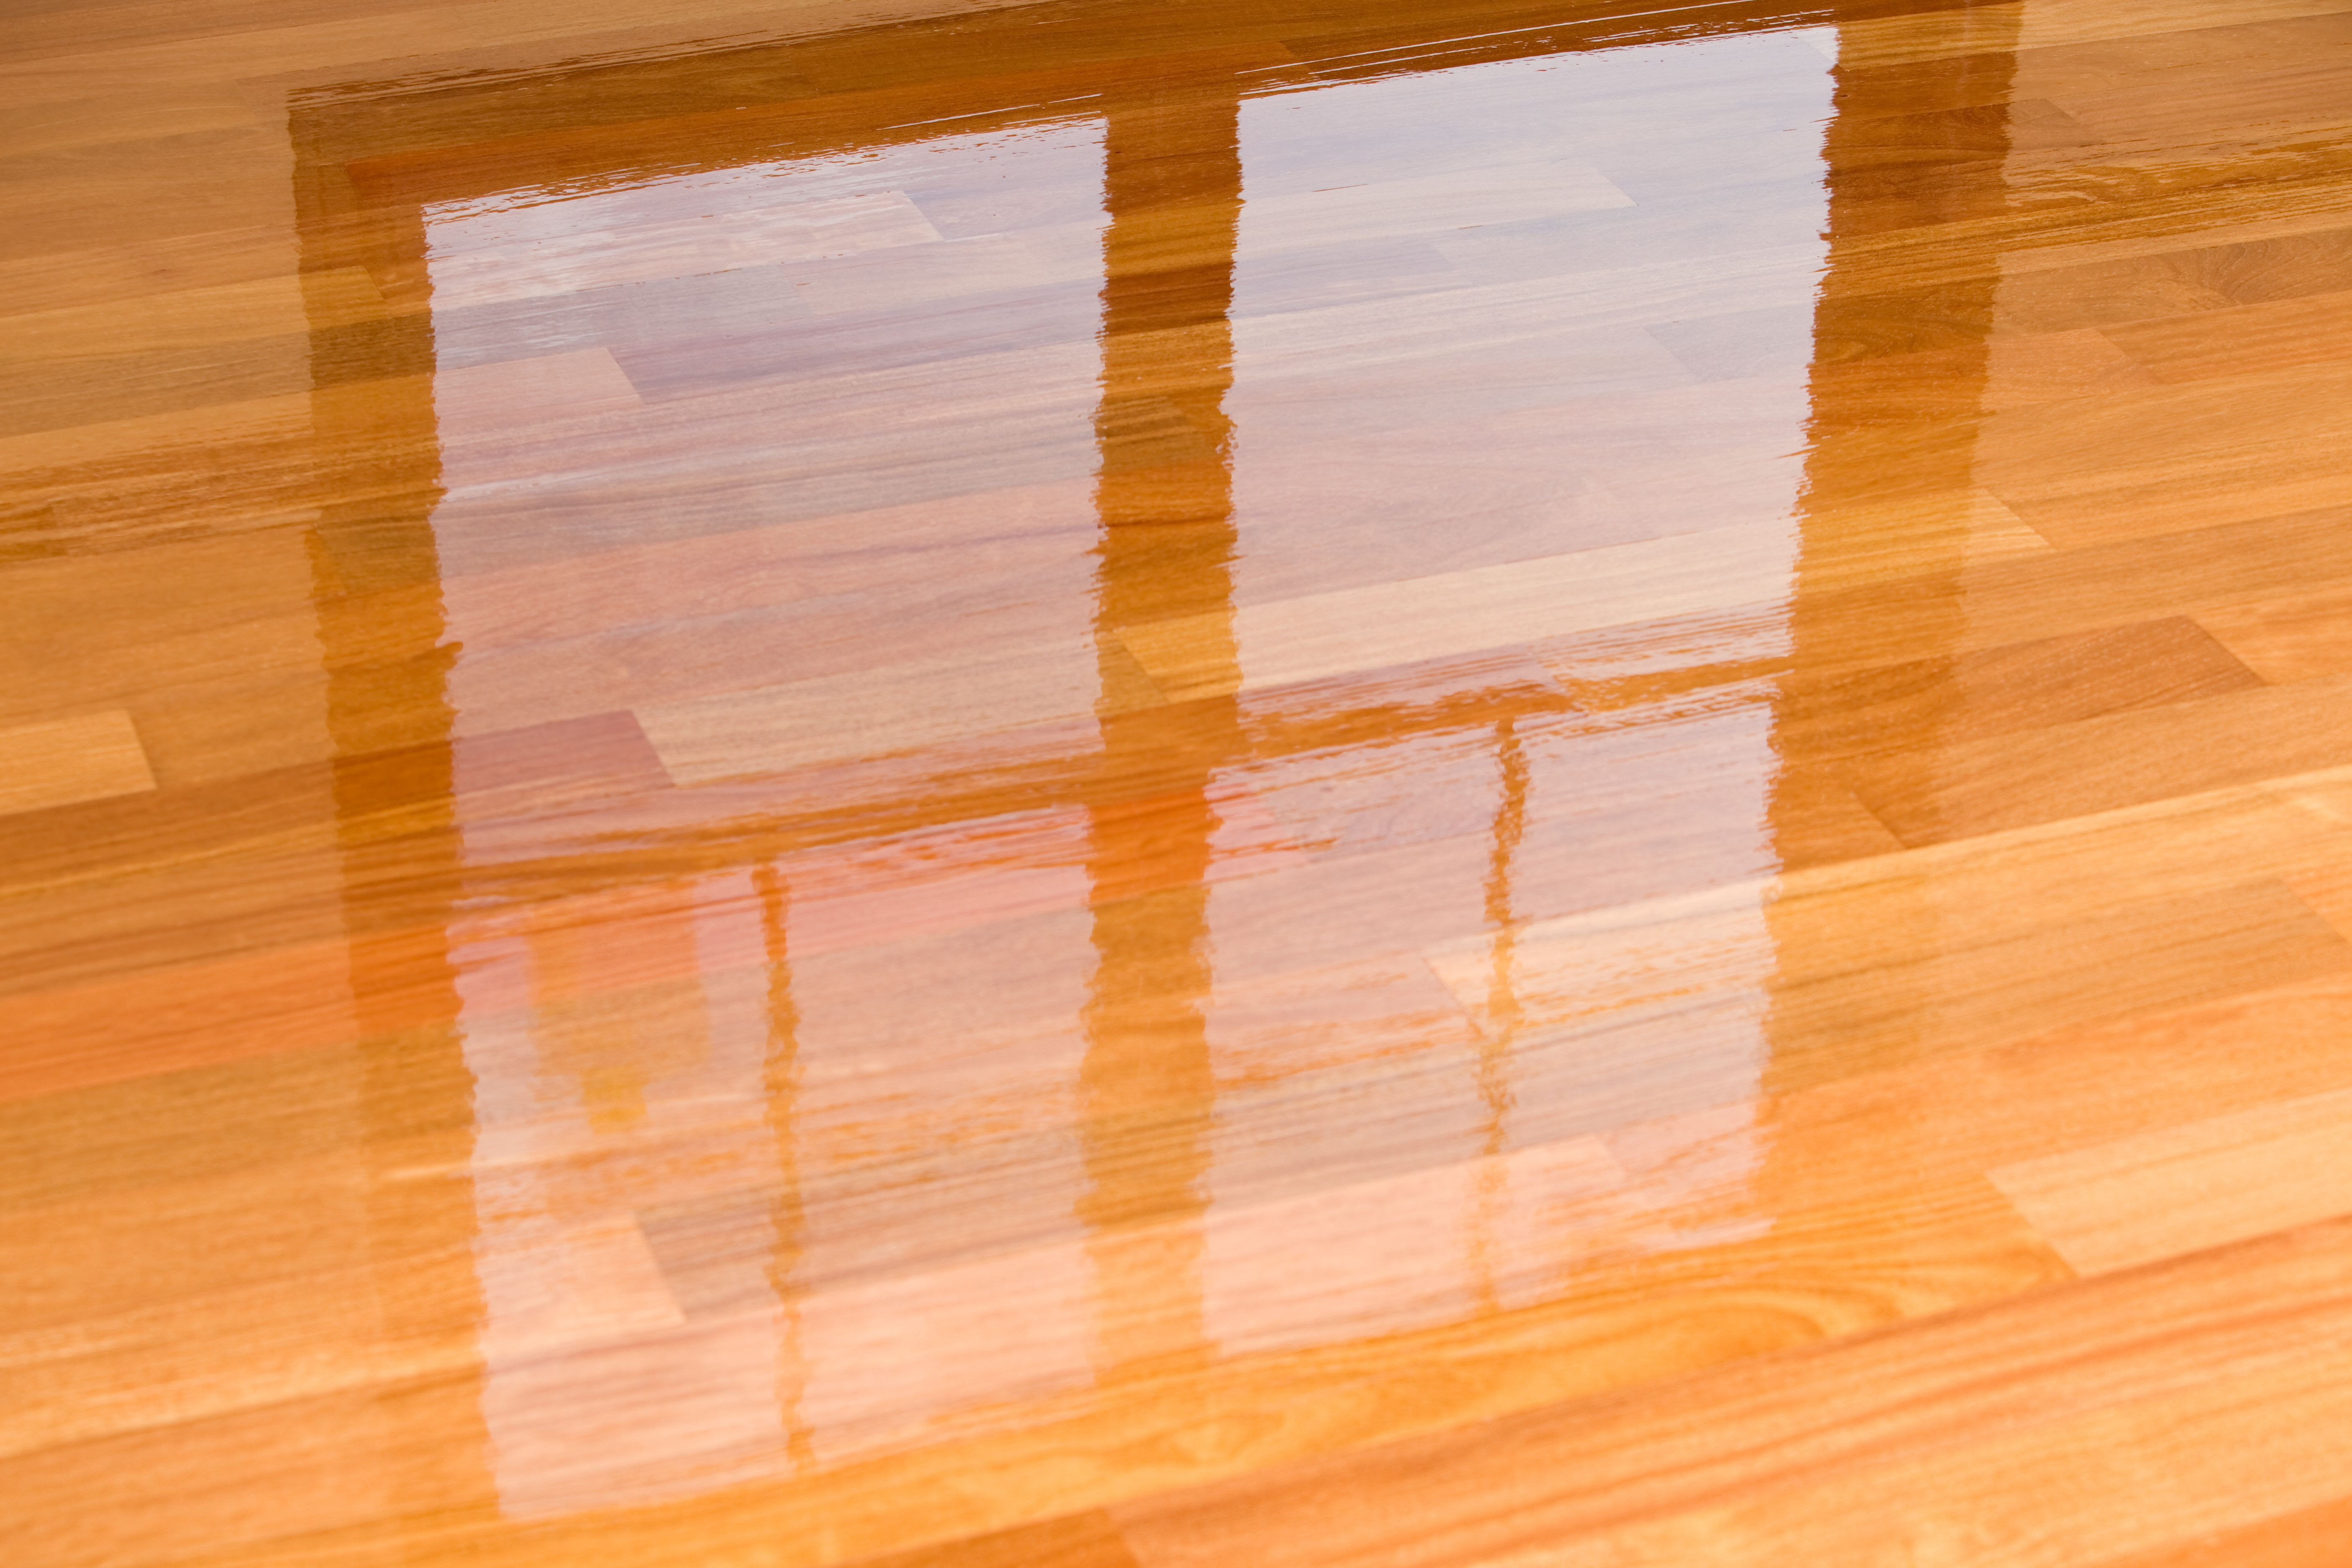 how to fix cupping hardwood floors of guide to laminate flooring water and damage repair inside wet polyurethane on new hardwood floor with window reflection 183846705 582e34da3df78c6f6a403968